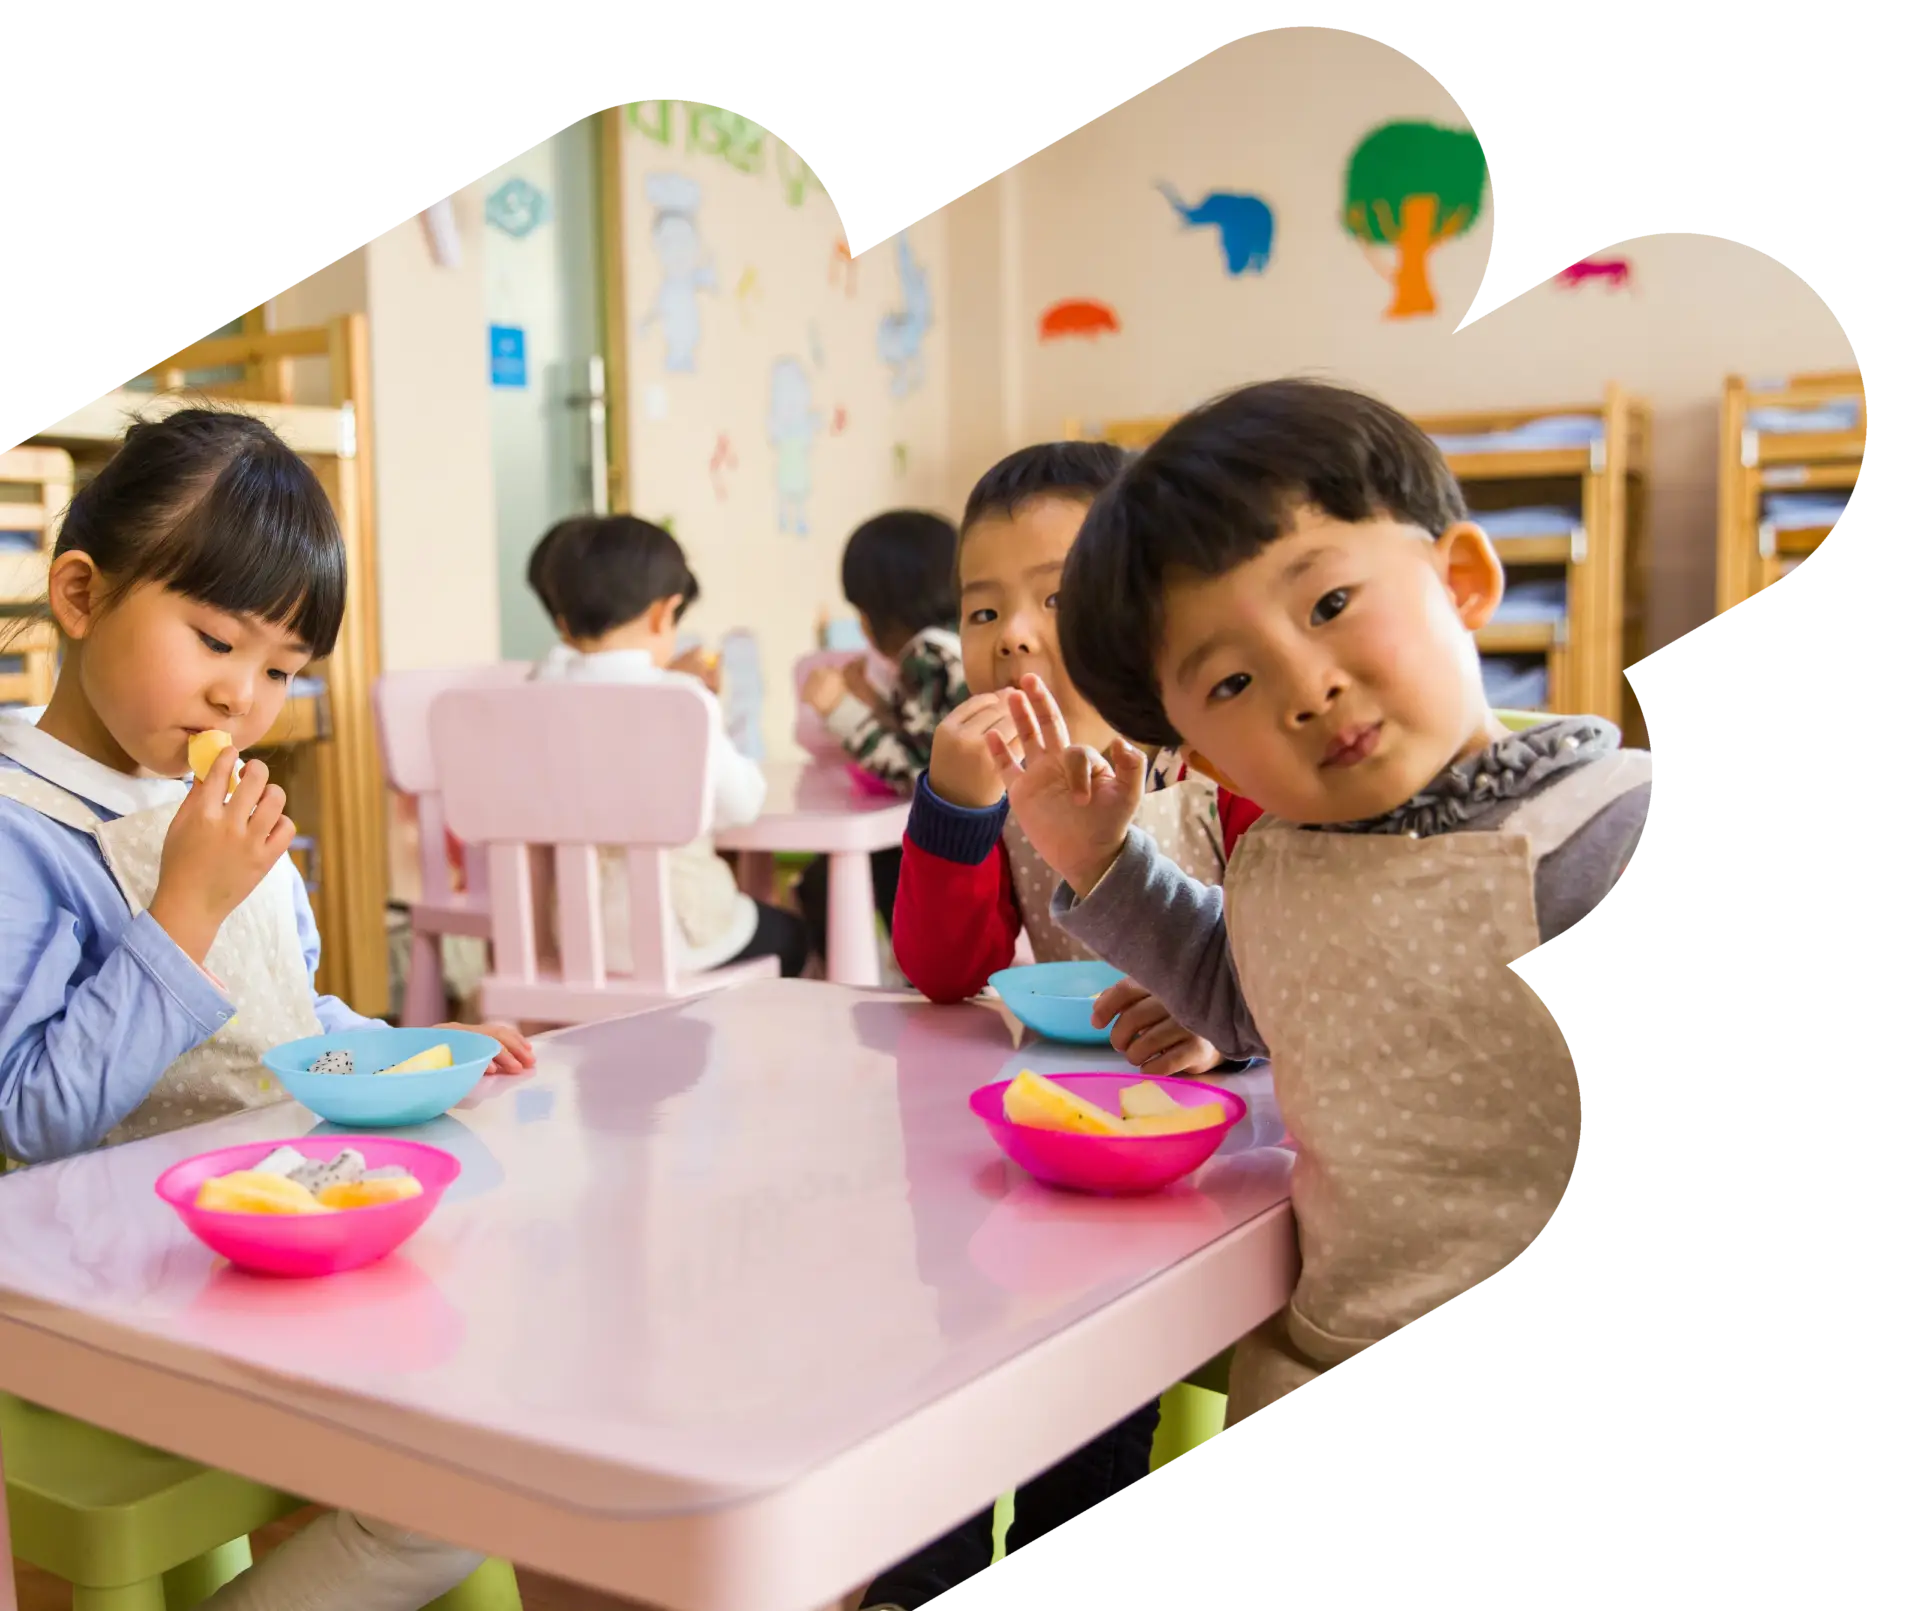 A group of children sitting at a table eating.